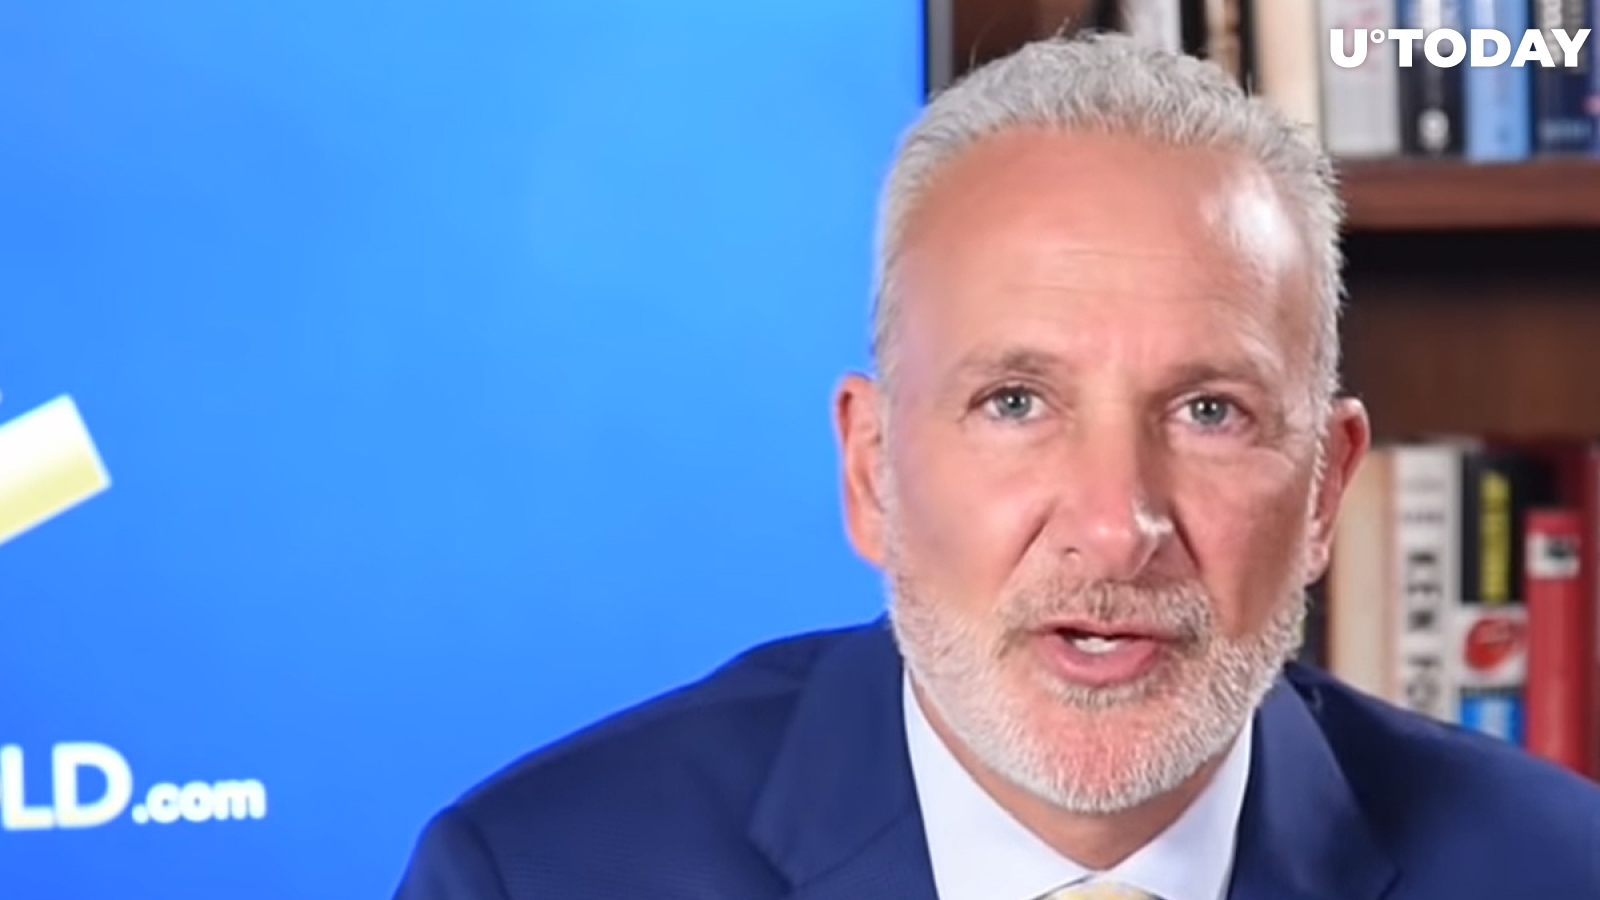 Here’s Why Current Gold Rise May Be Bad for Bitcoin, According to Peter Schiff